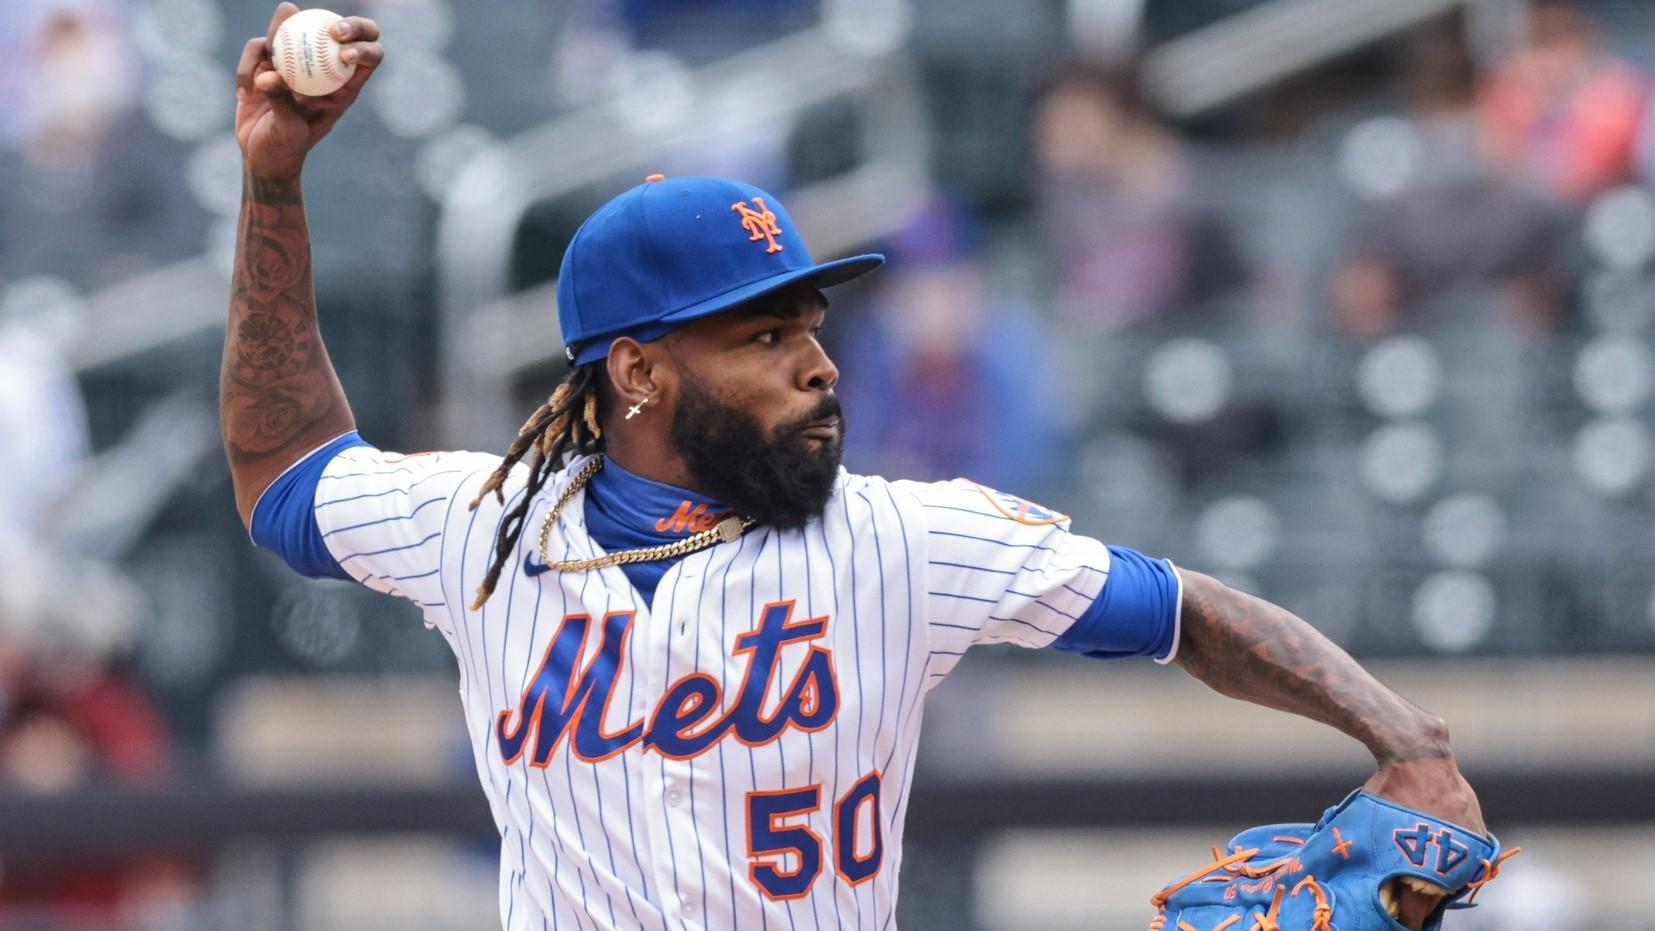 Apr 25, 2021; New York City, New York, USA; New York Mets relief pitcher Miguel Castro (50) delivers a pitch during the eighth inning against the Washington Nationals at Citi Field. / Vincent Carchietta-USA TODAY Sports